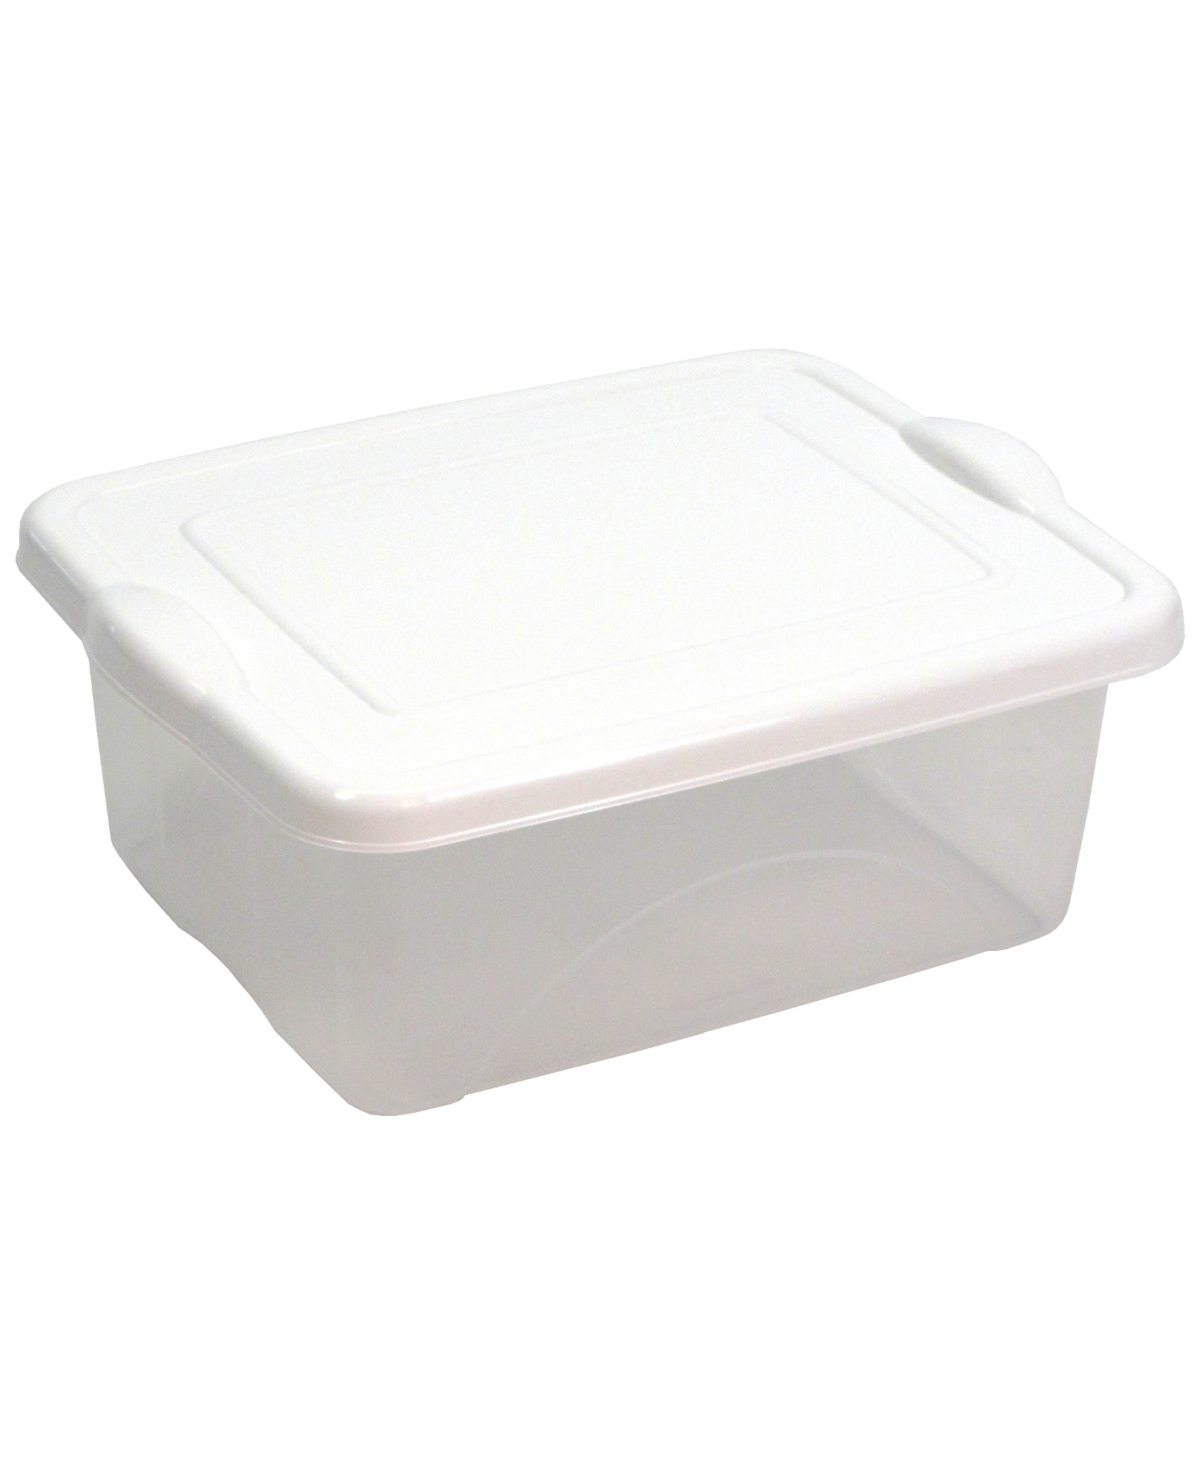 2.5 Gallon Clearview Storage with Color Snap-on Lid - White